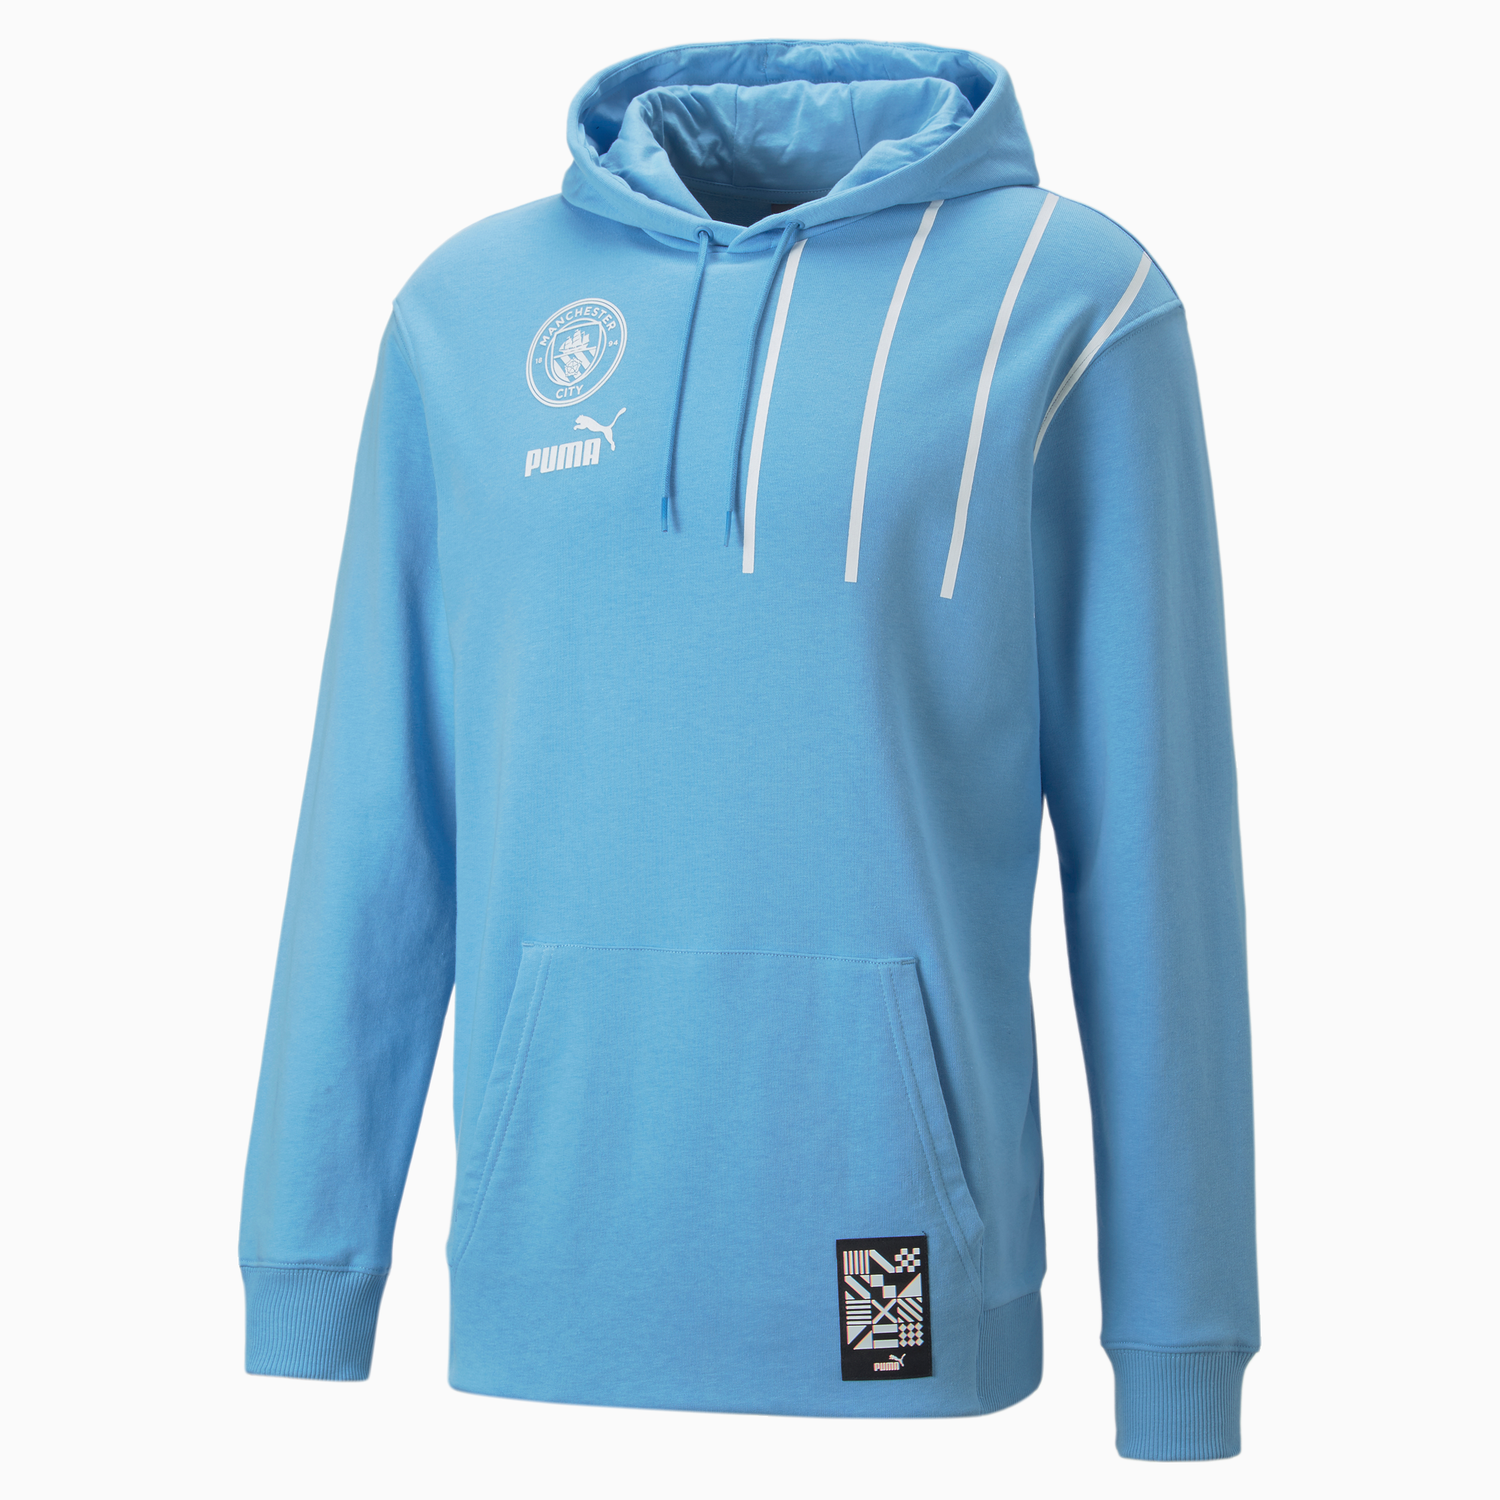 Puma 2022-23 Manchester City FtblCulture Hoody - Light Blue-White (Front)